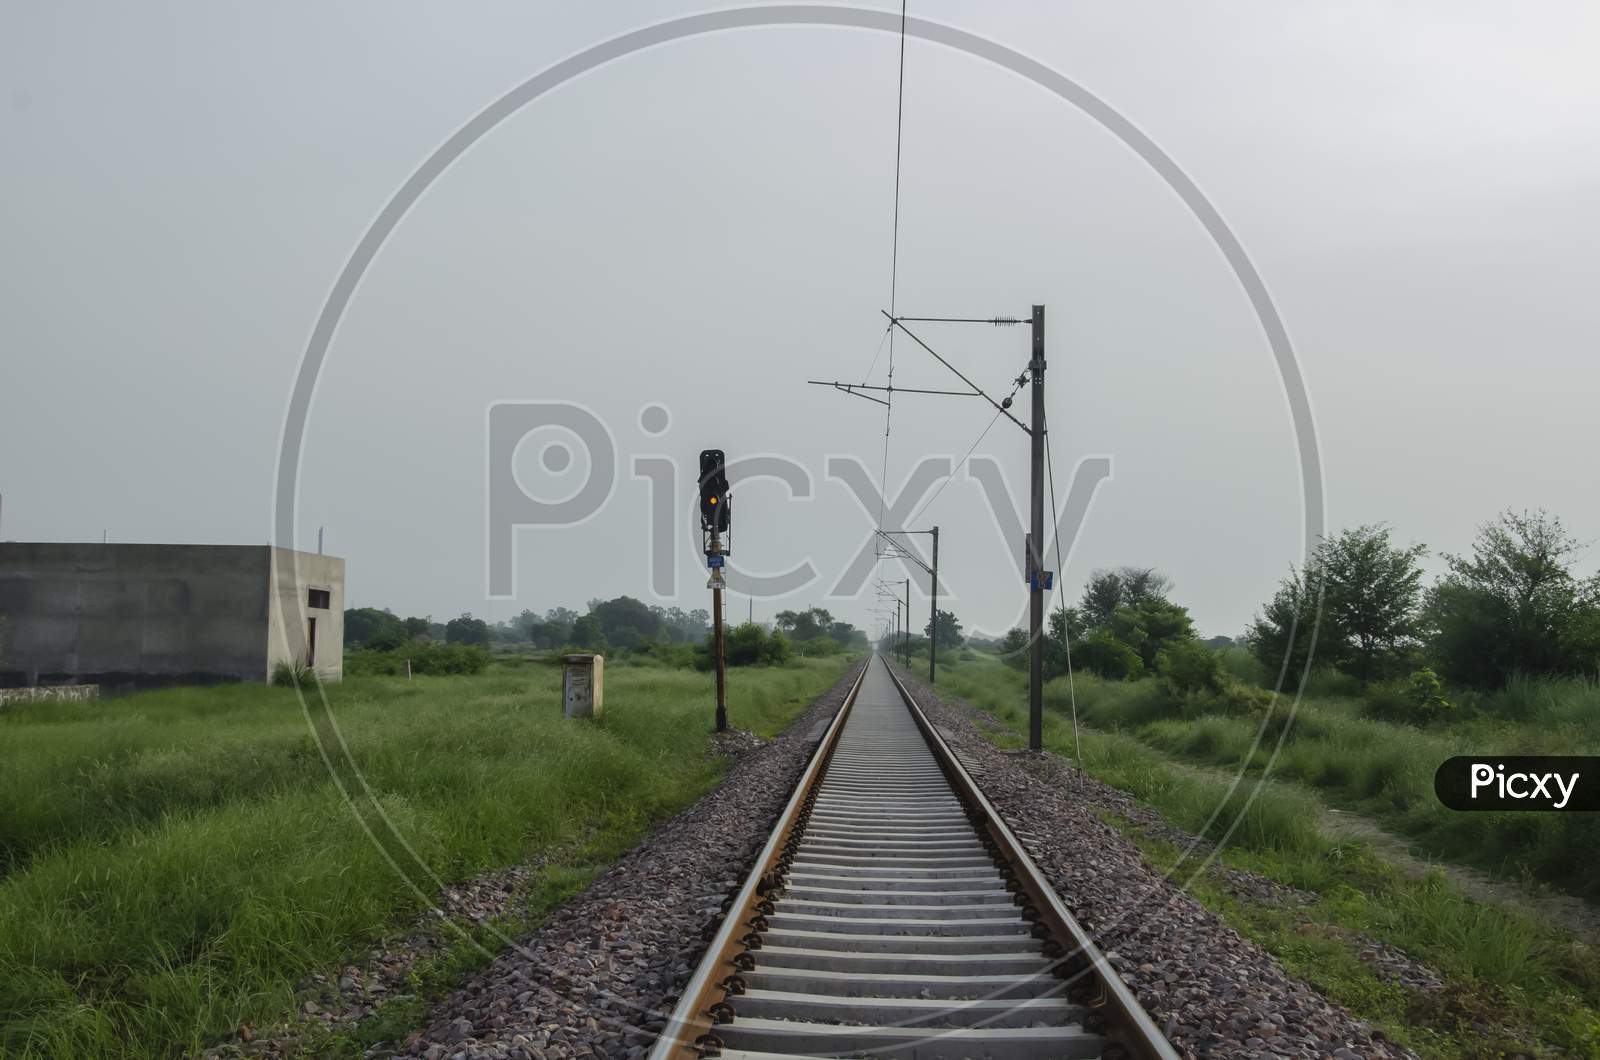 RAILWAY TRACK WITH LIGHT AND ELECTRIC POLE IN LANDSCAPE.